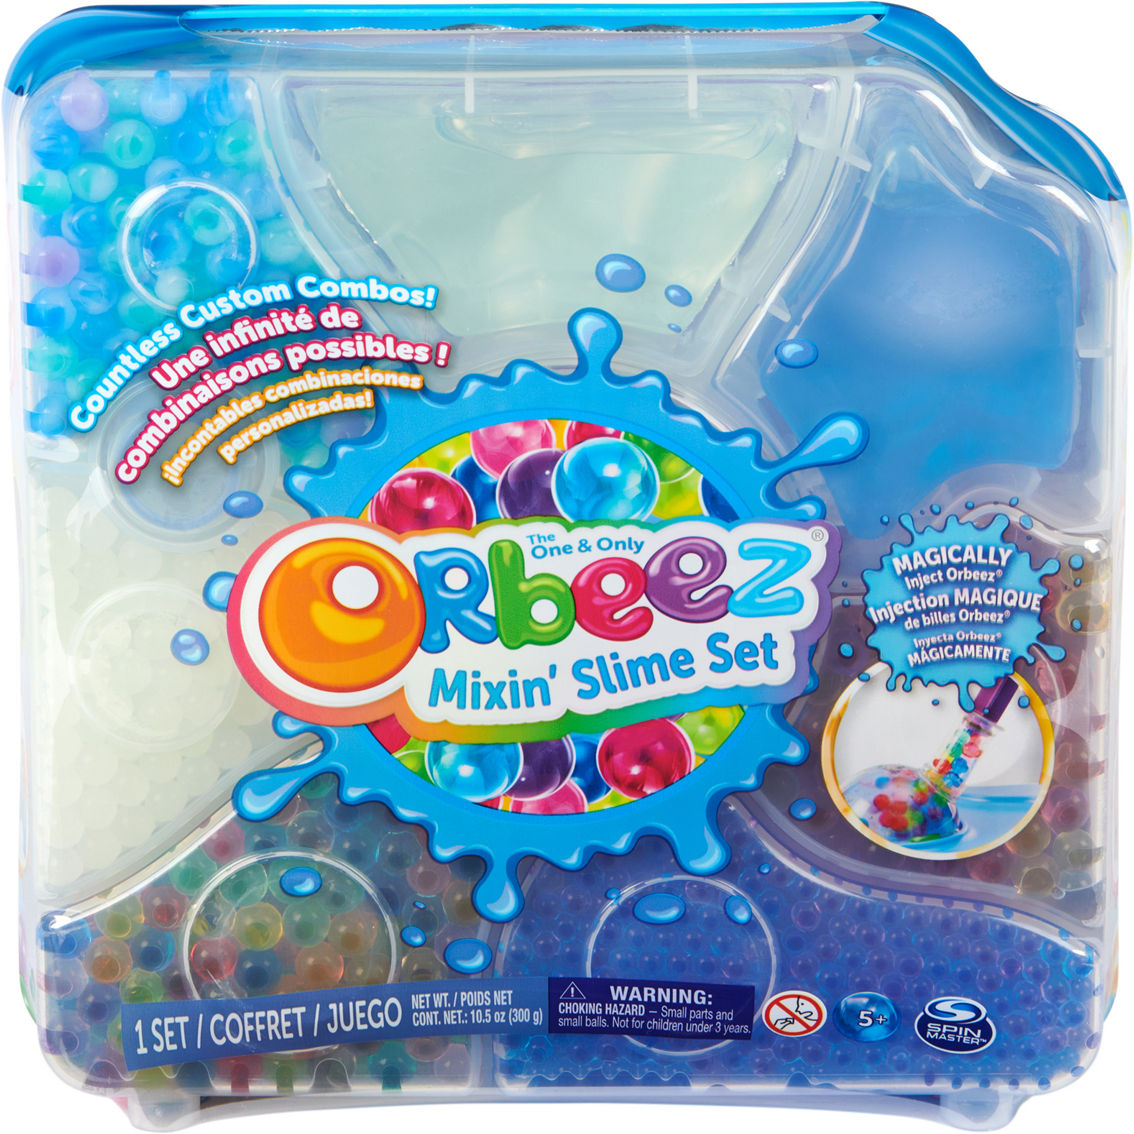 What to do with orbeez or water beads, games and experiments: squishy ball,  spa, experiments 